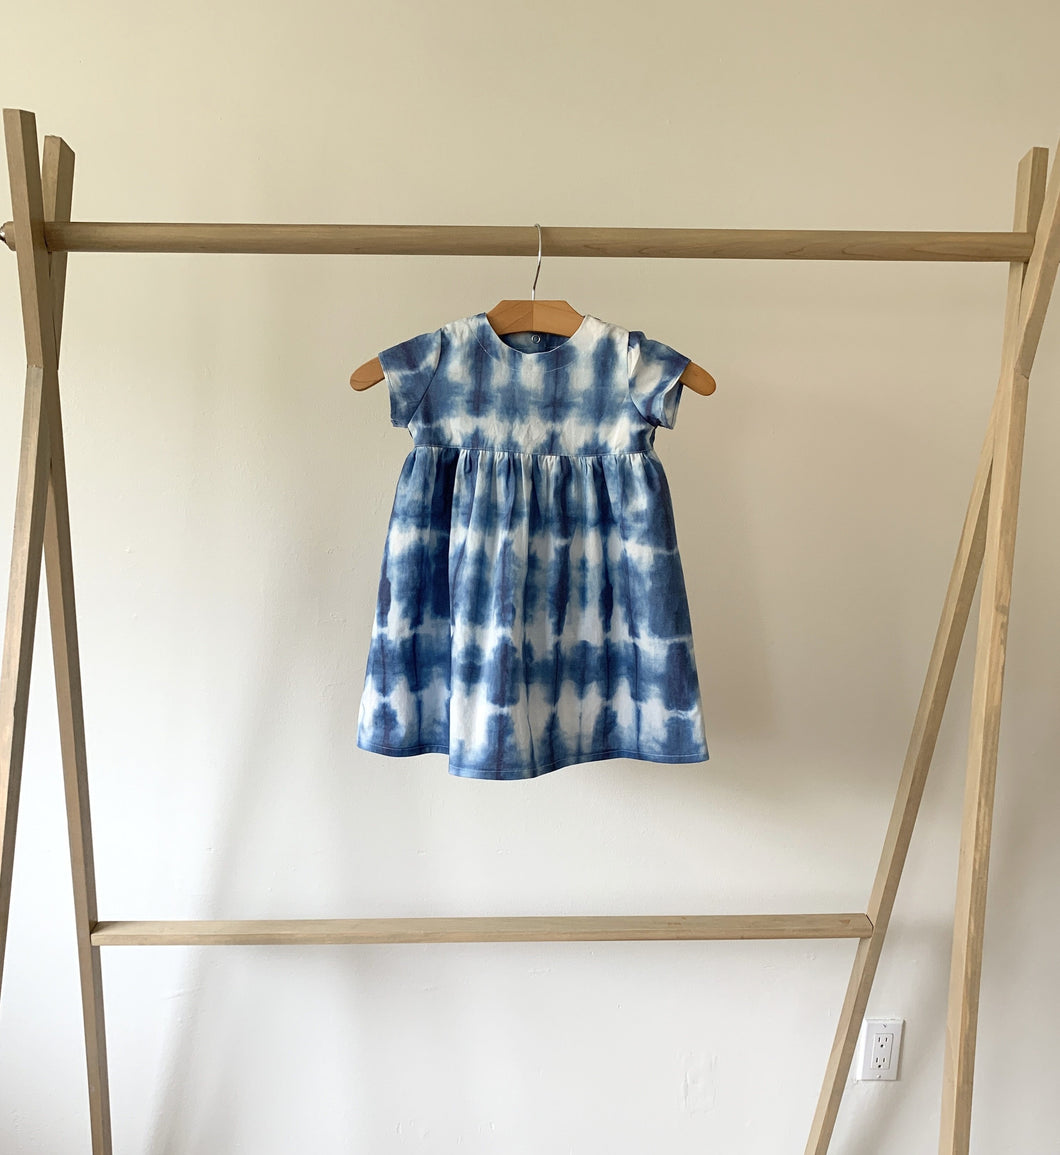 Baby/Toddler Dress - Channel Islands